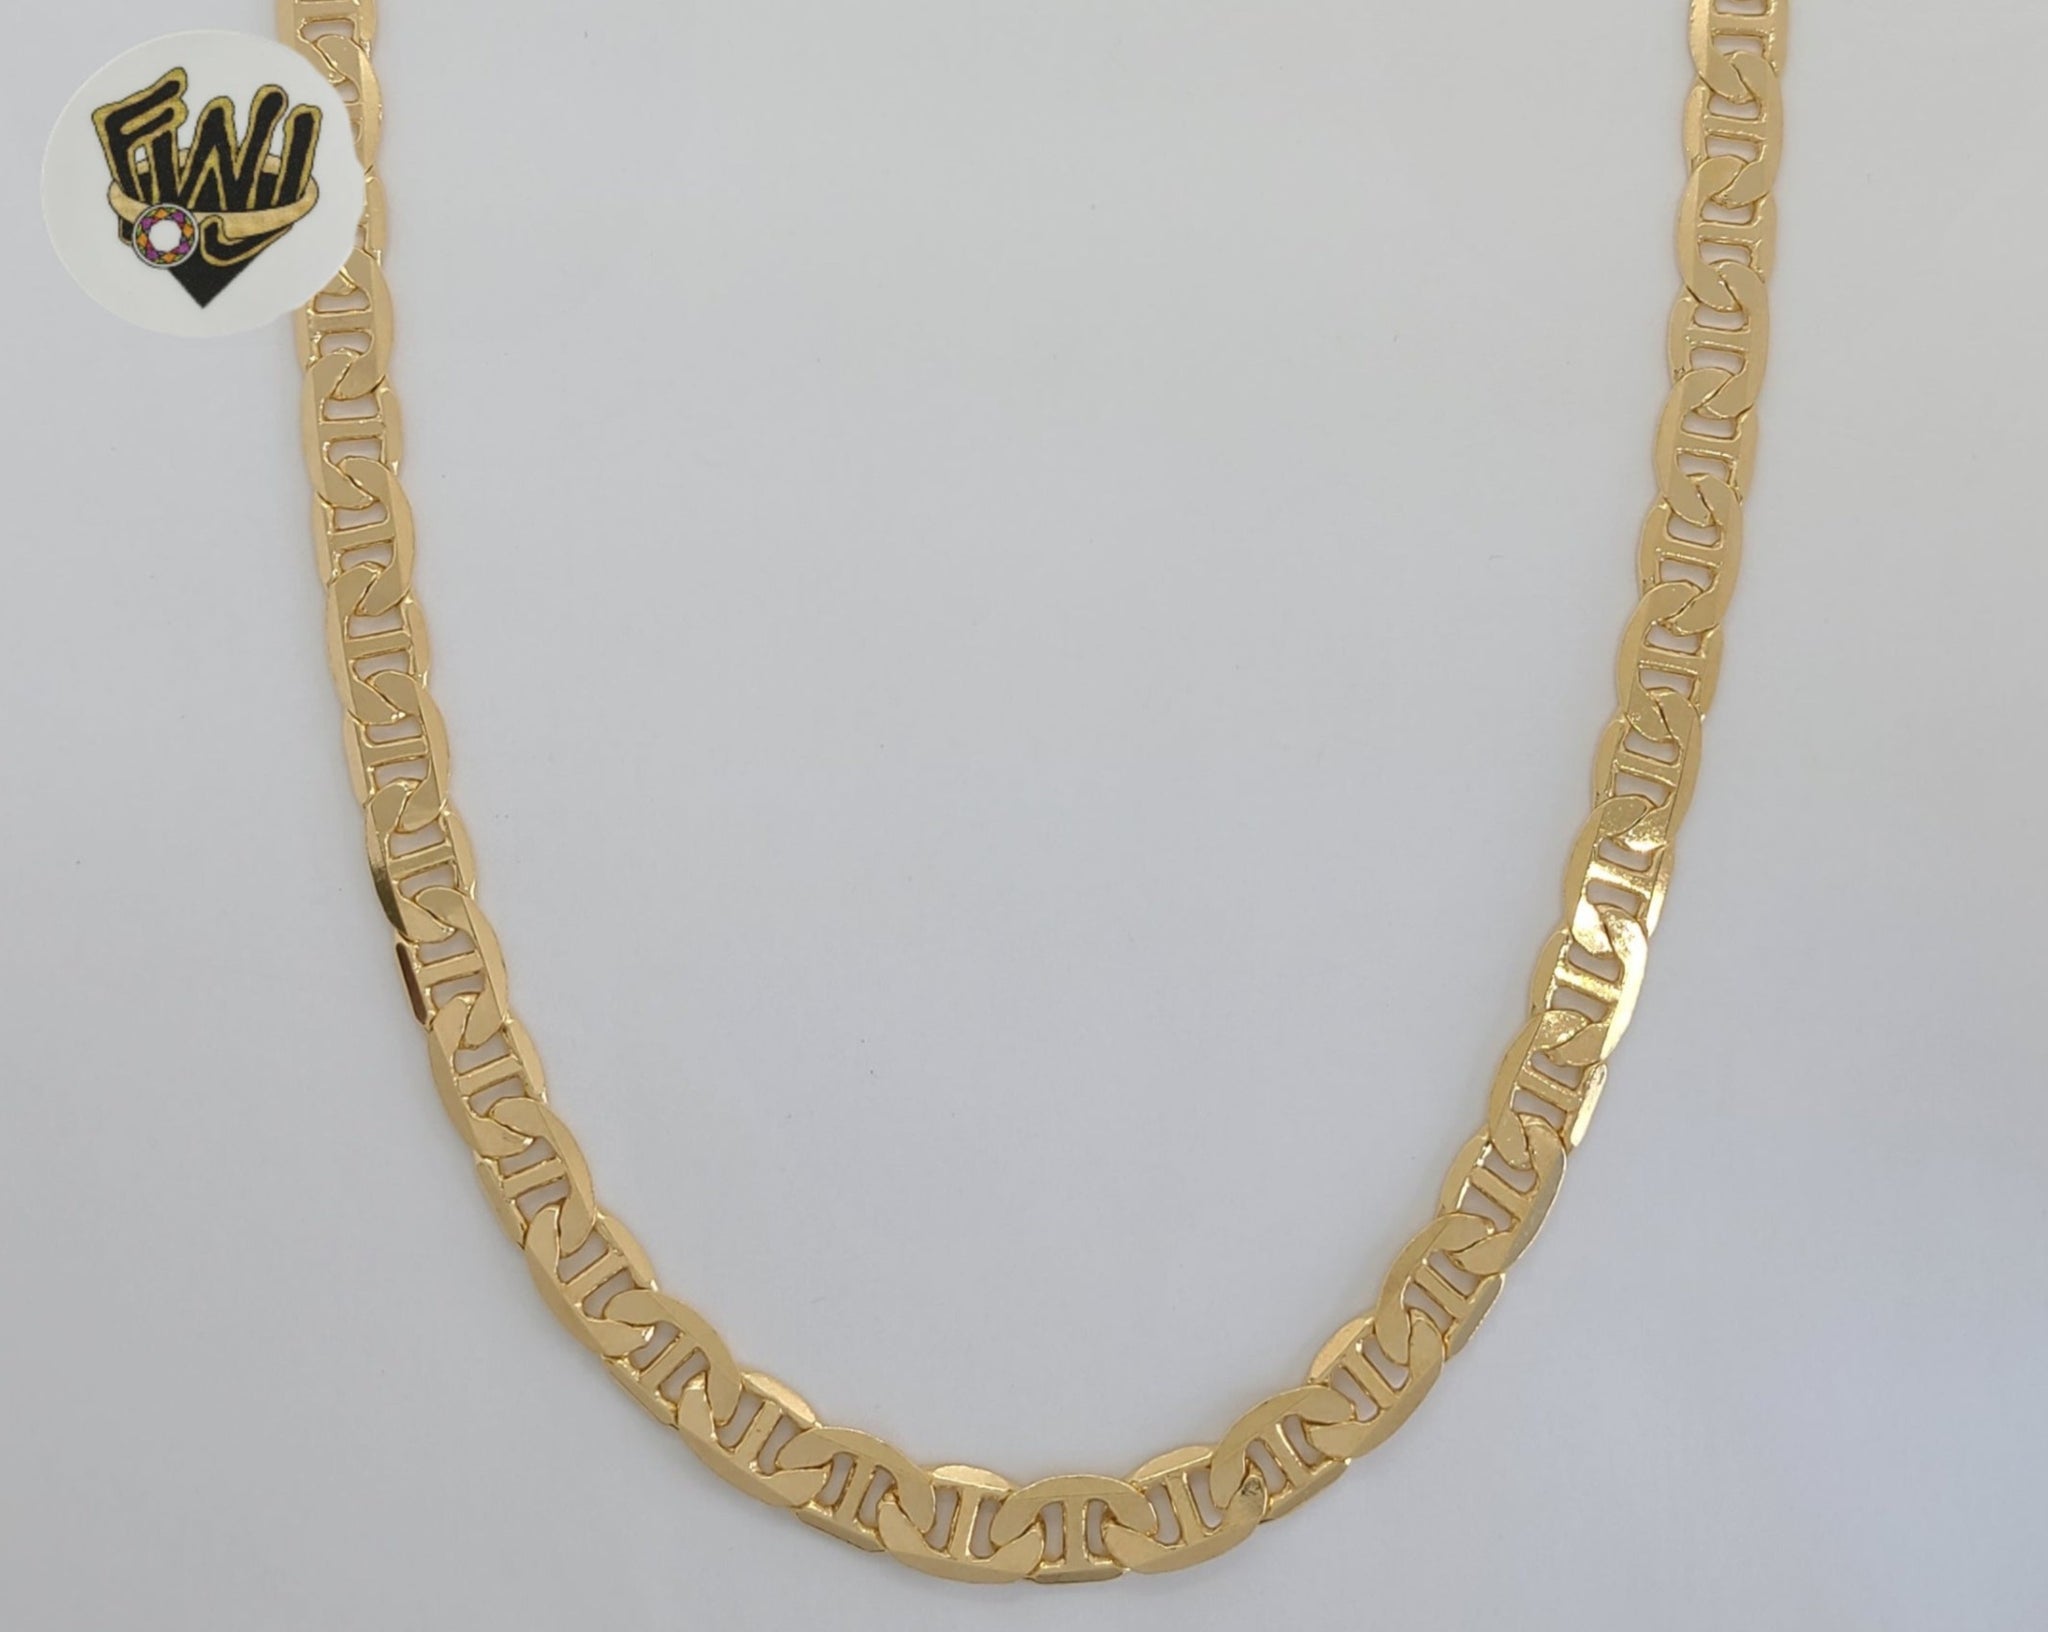 Special 18K Gold Filled 24 Marine Link Chain